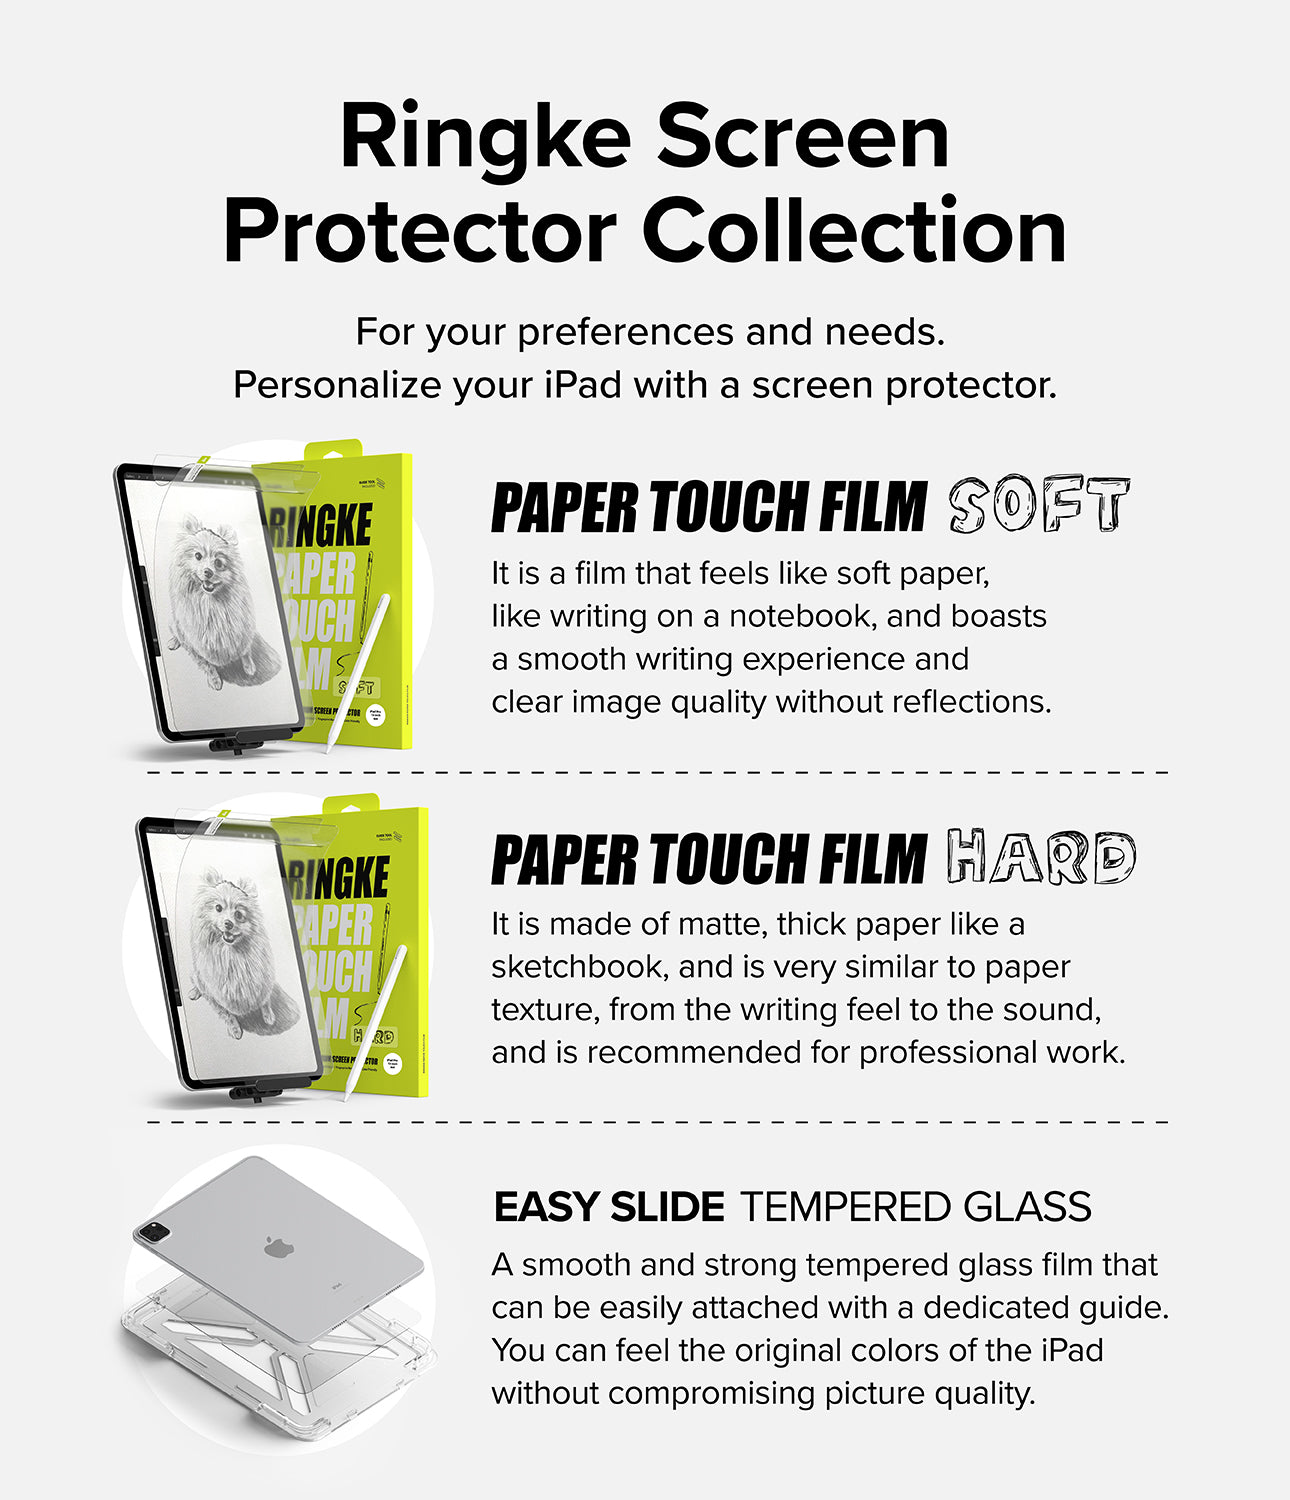 iPad Pro 13" (M4) Screen Protector | Paper Touch Film - Soft - Ringke Screen Protector Collection. For your preferences and needs. Personalize your iPad with a screen protector.